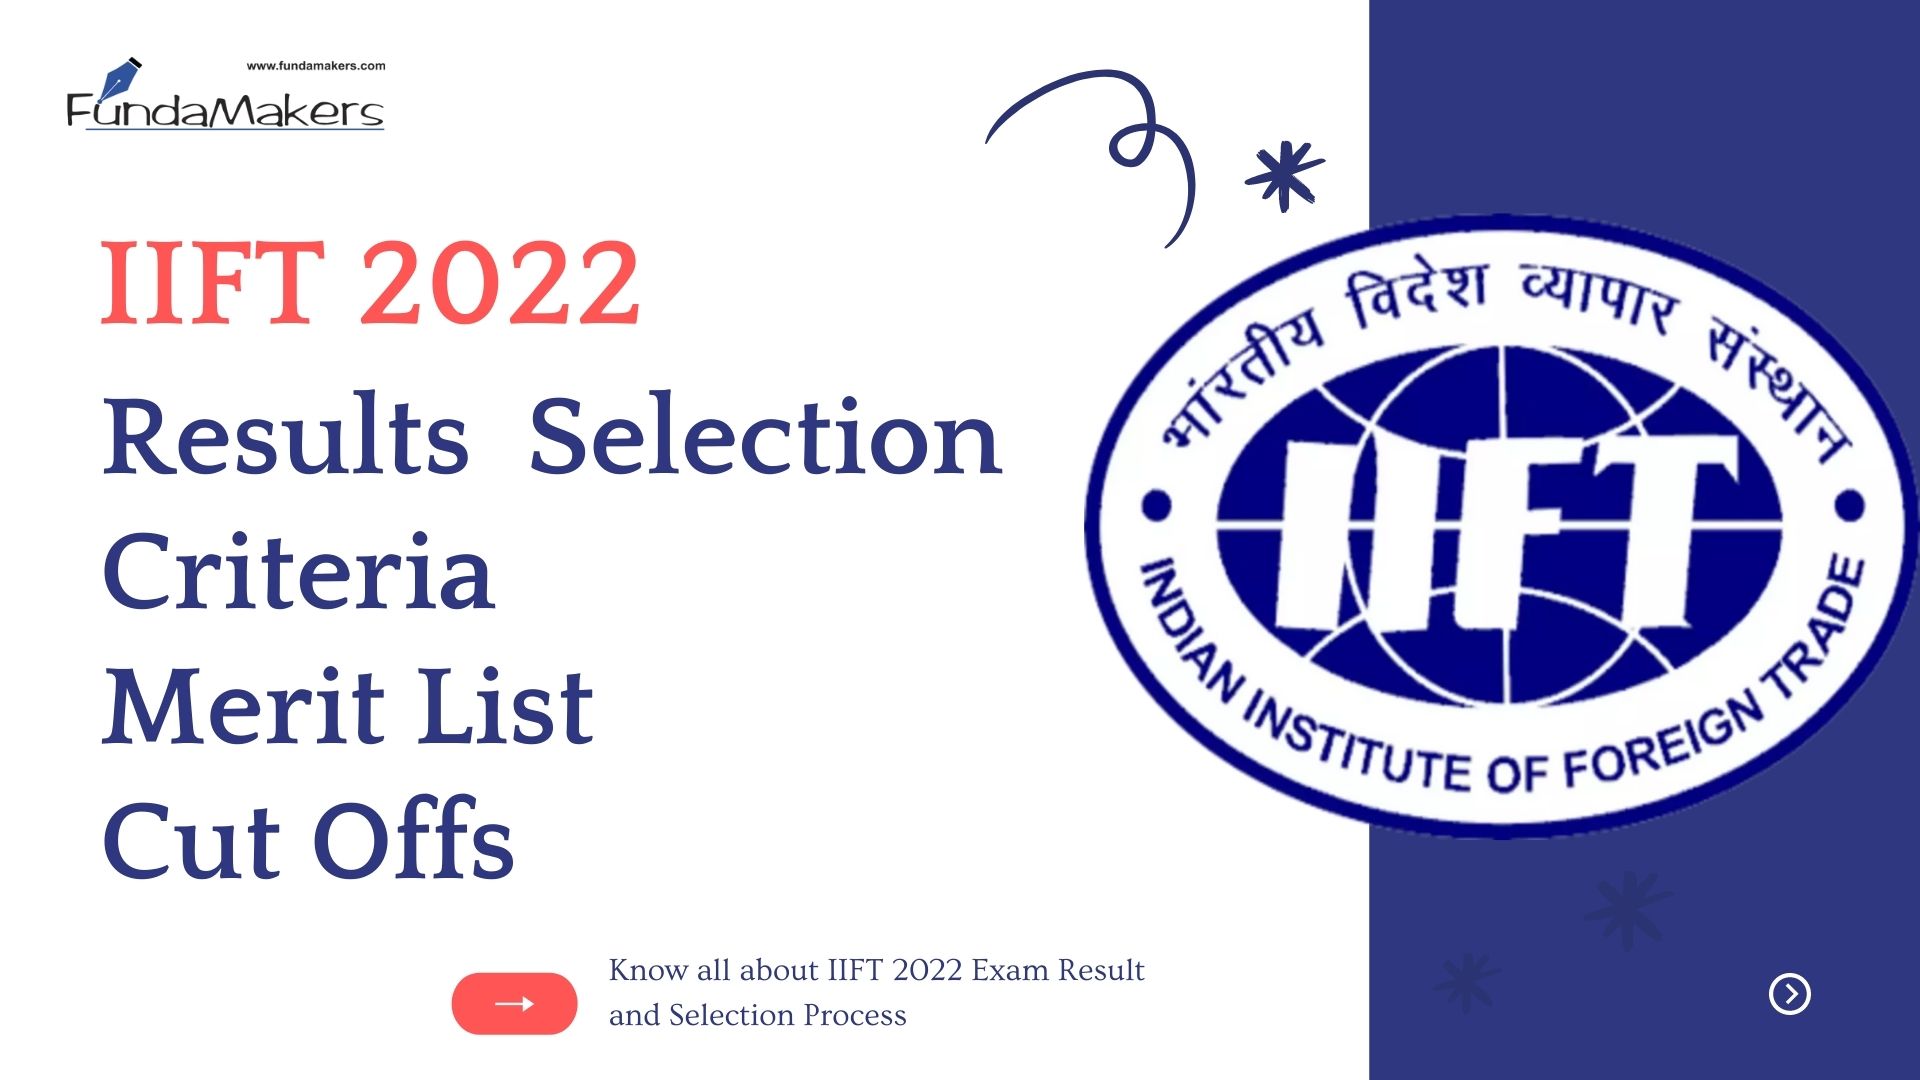 IIFT 2022 Results